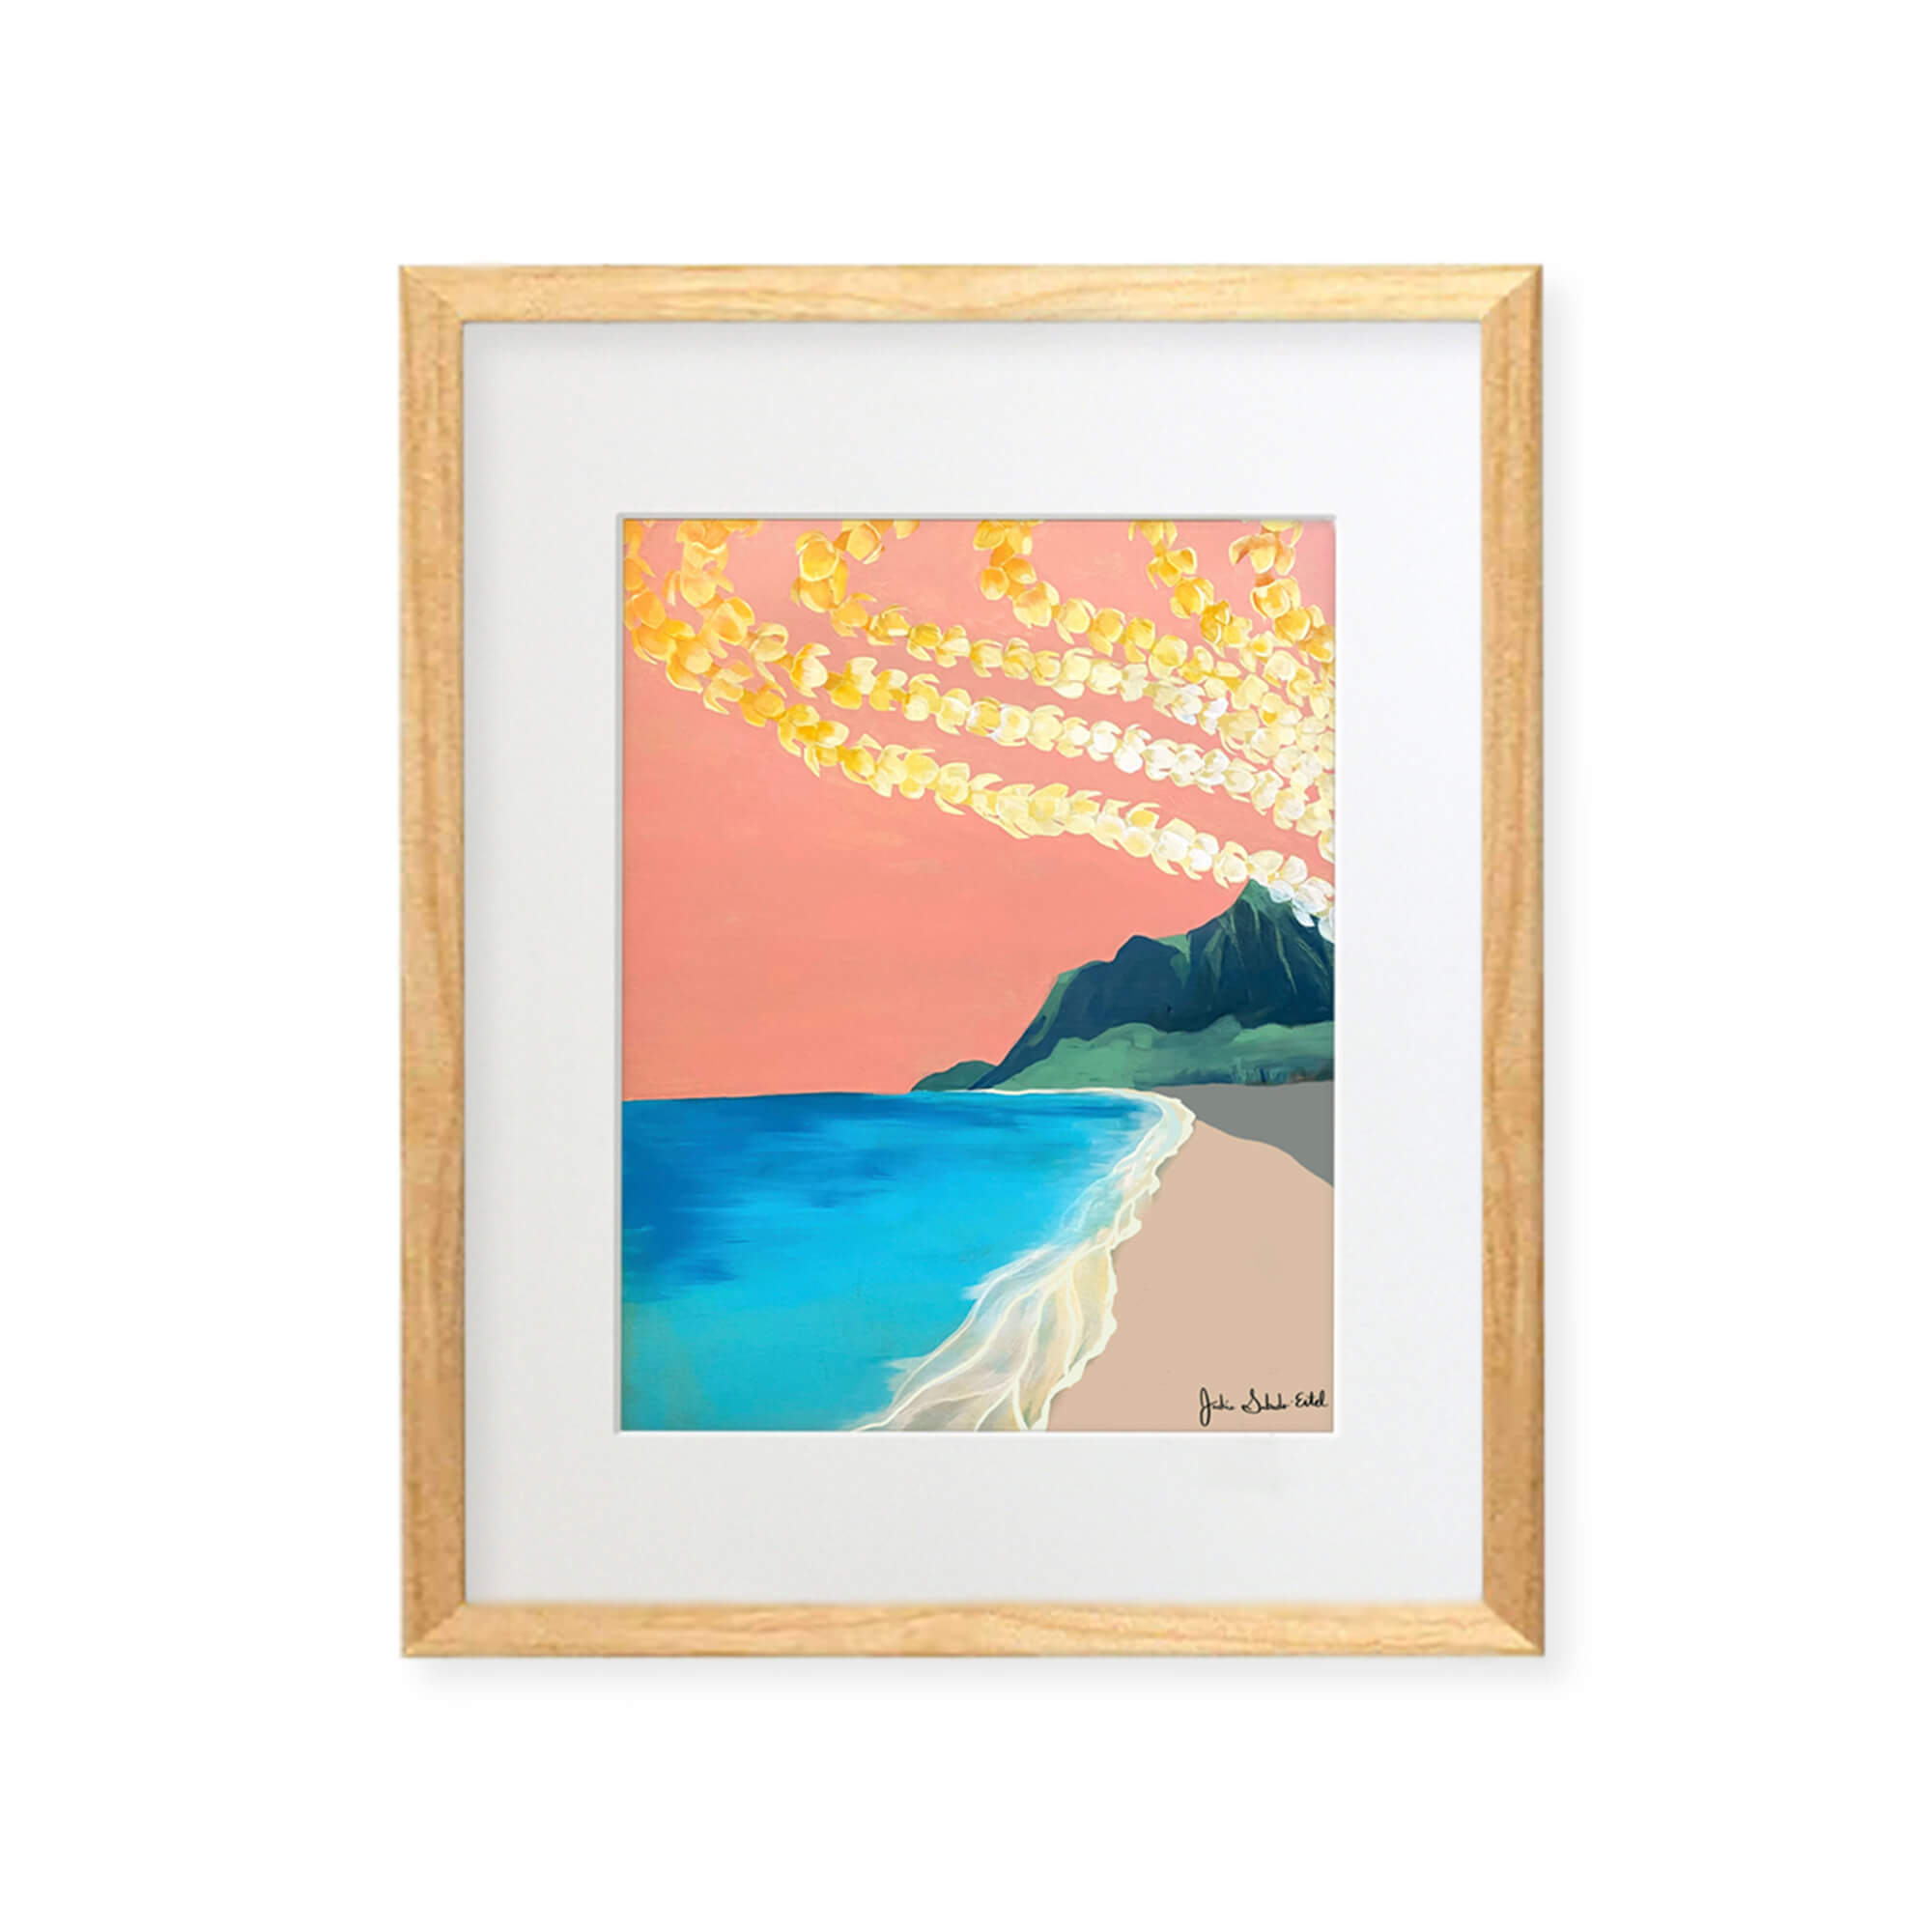 A framed matted art print featuring a beautiful landscape of Hawaii with lei above by Hawaii artist Jackie Eitel